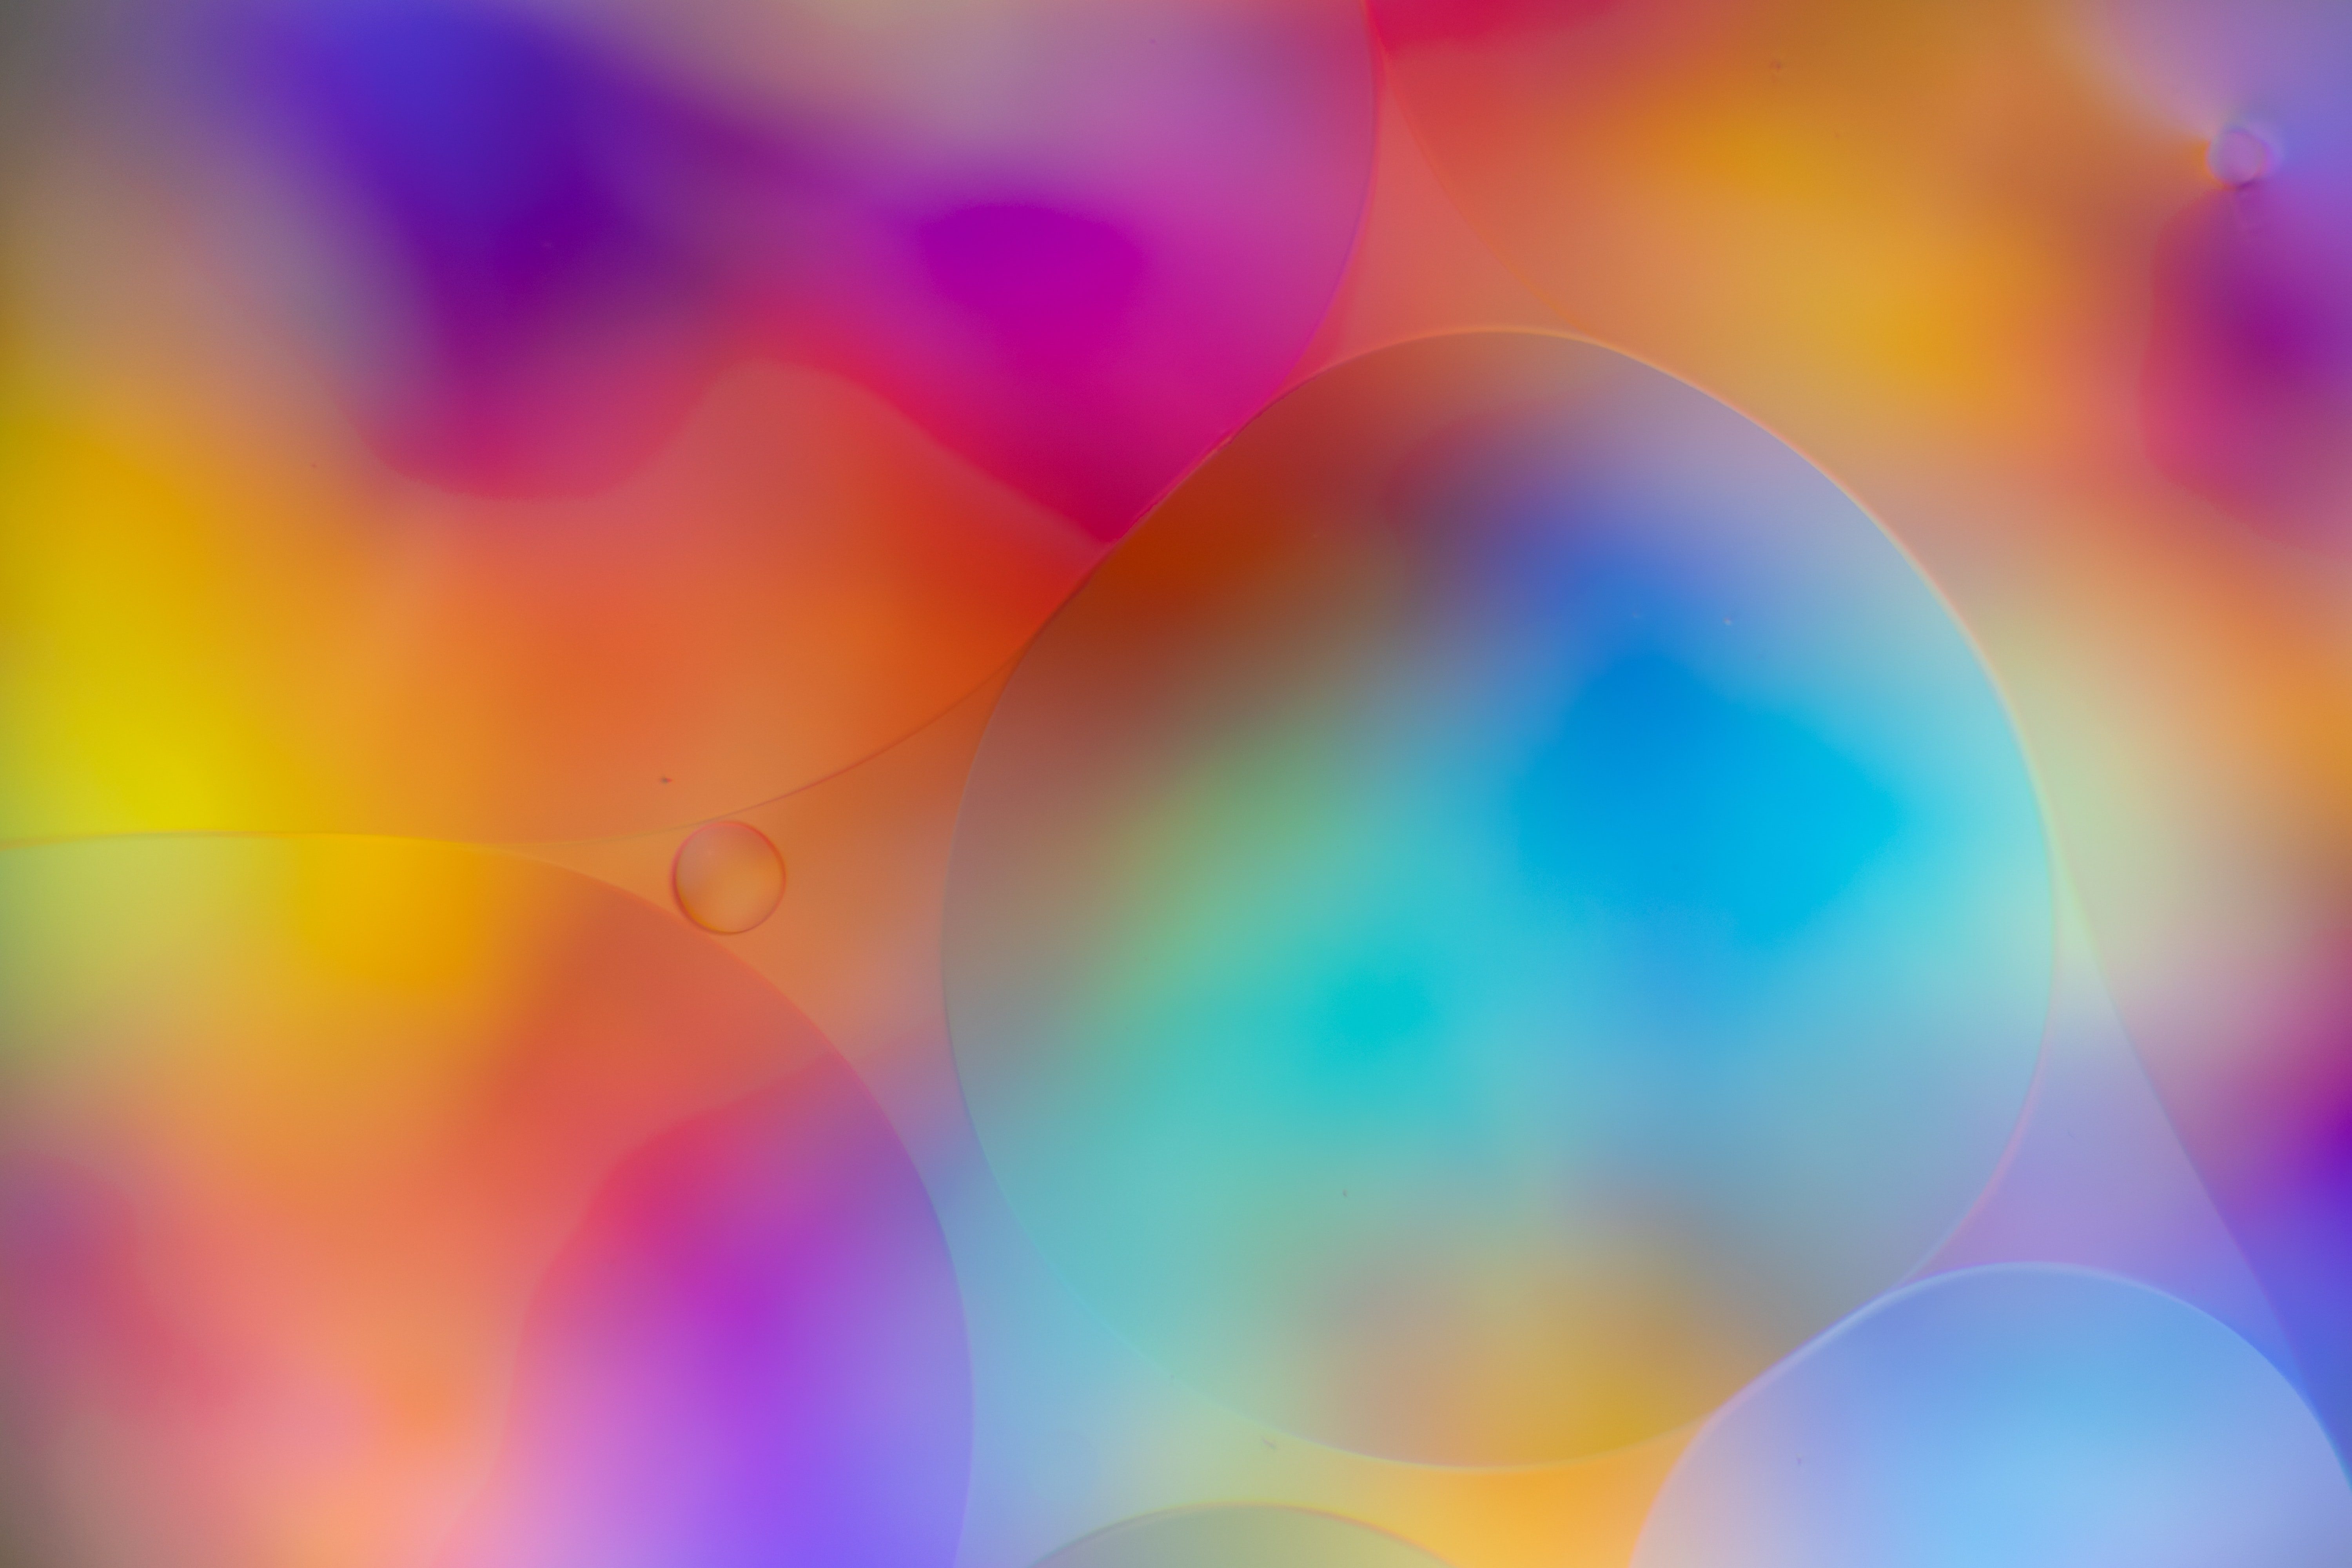 HD wallpaper motley, gradient, abstract, water, bubbles, multicolored